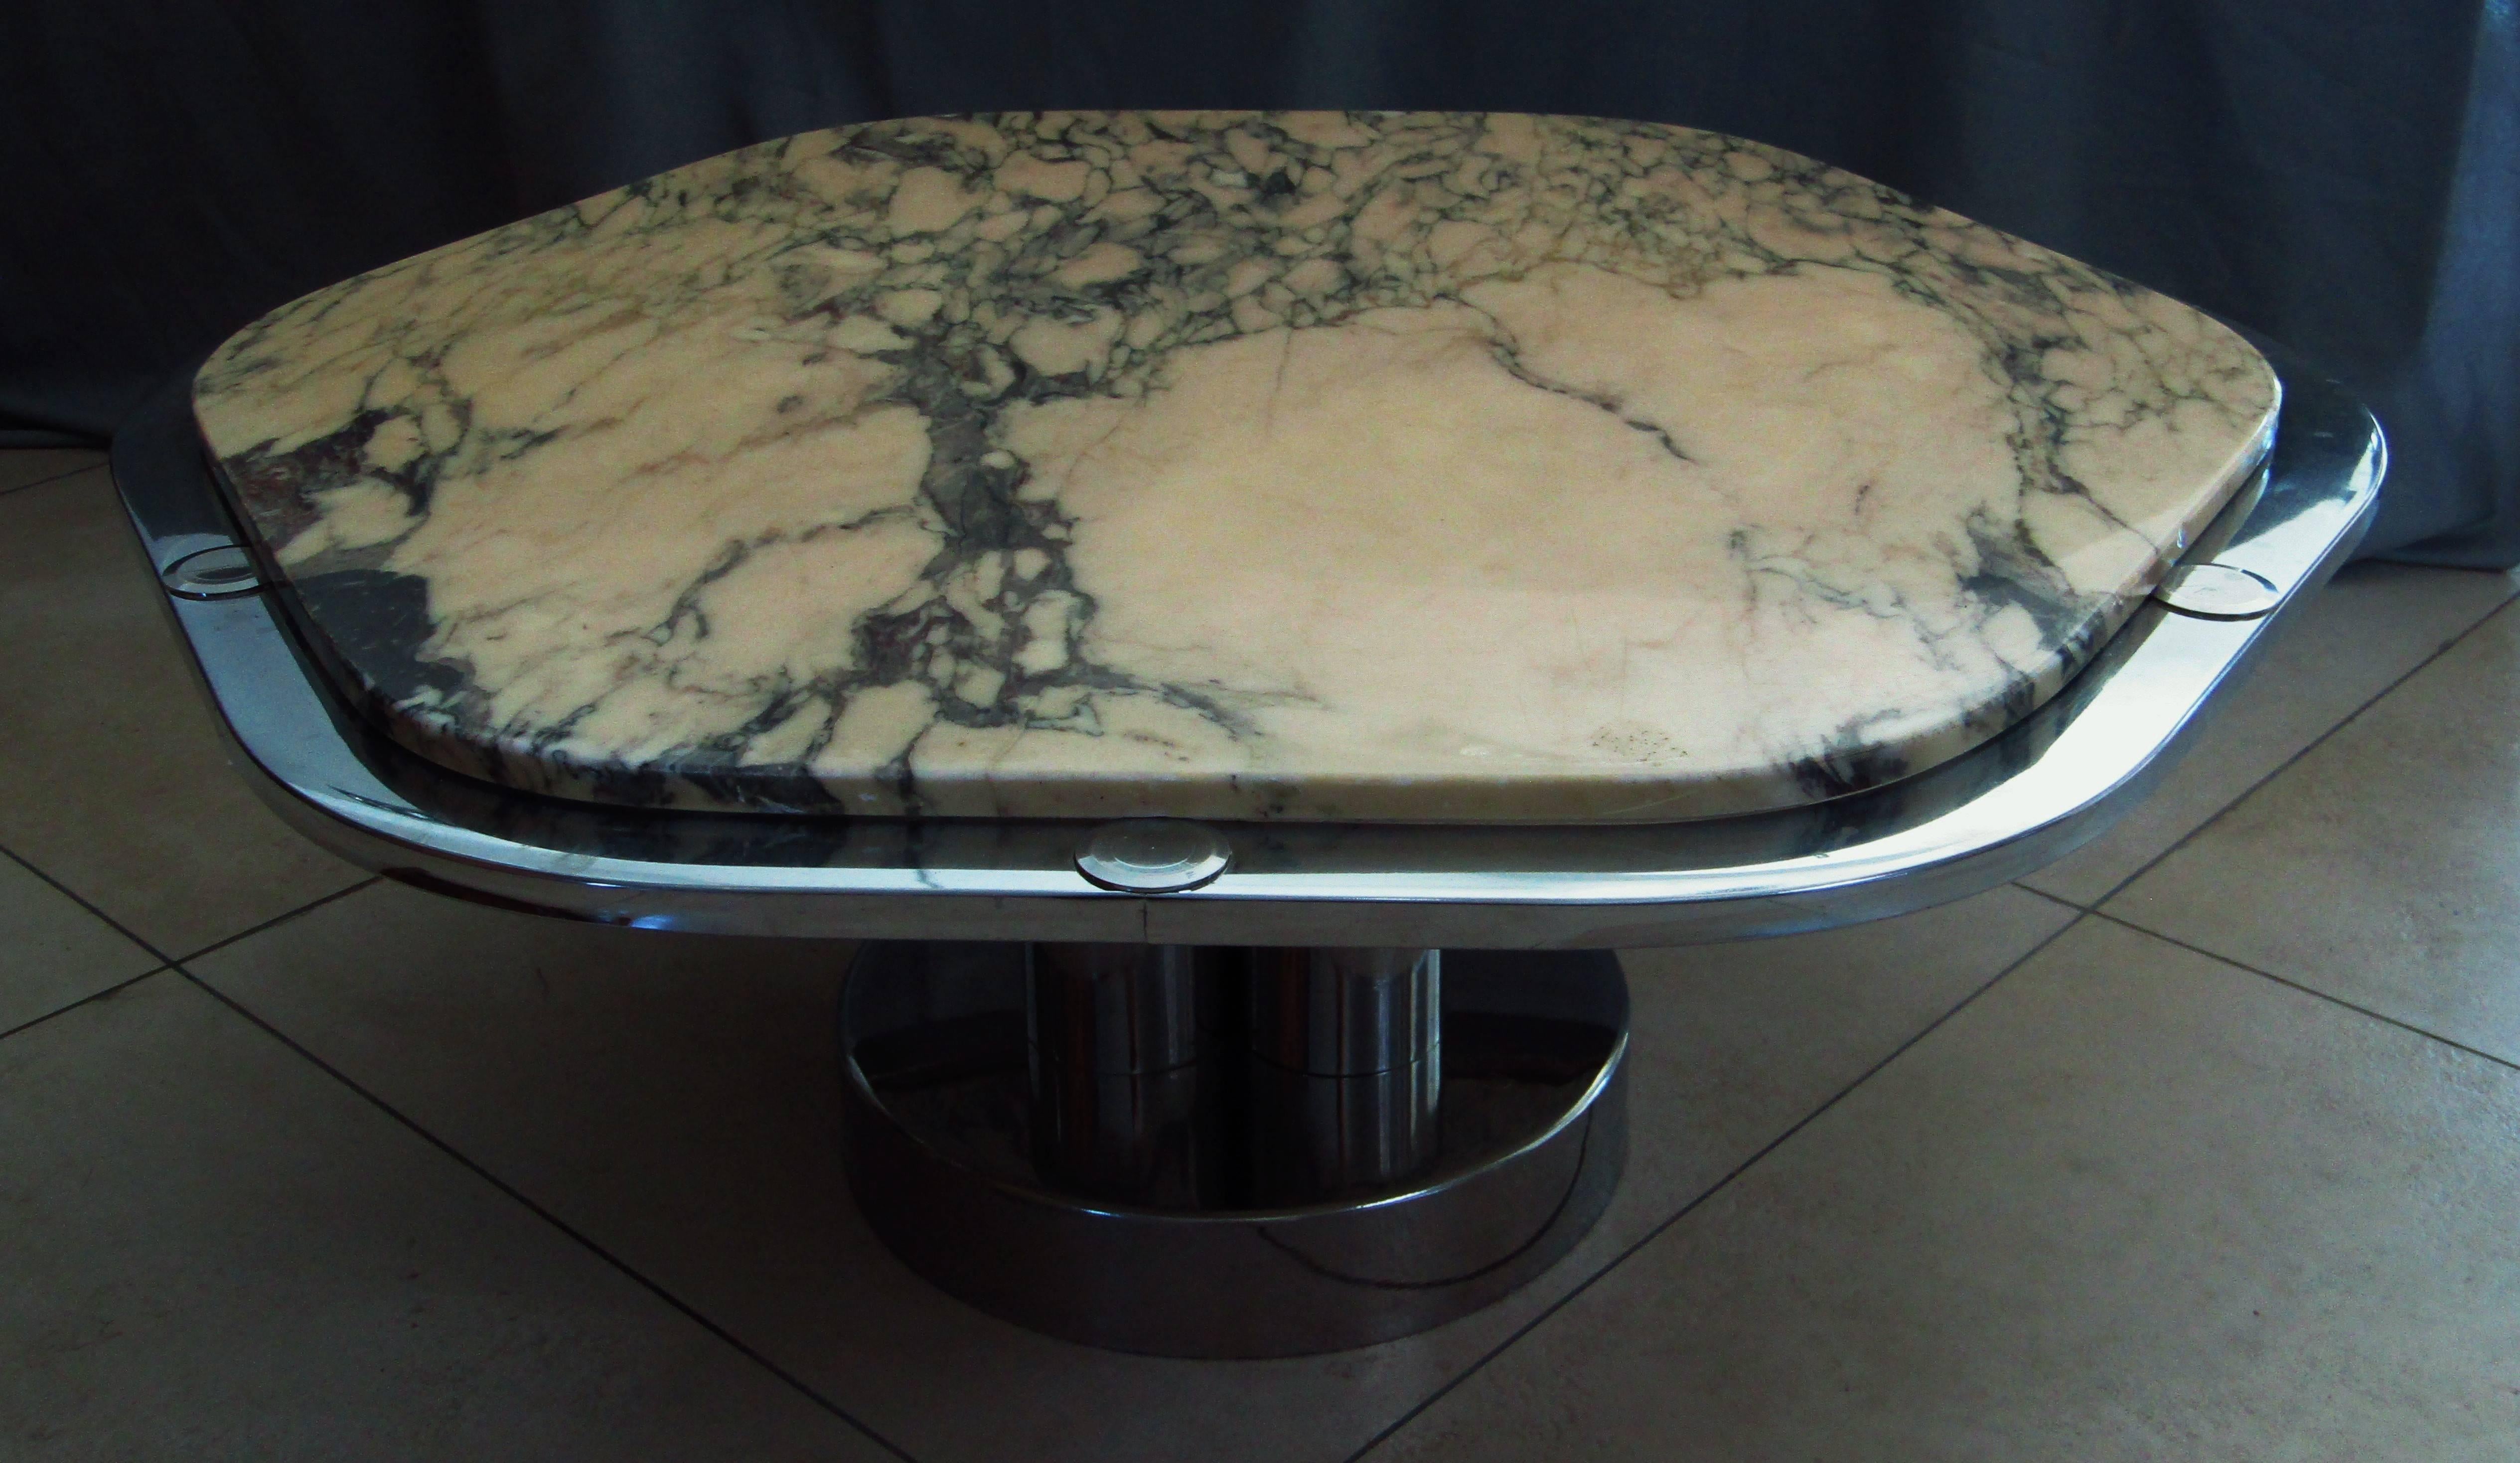 Hexagonal midcentury chrome and marble coffee table, France, 1968. Good unrestored vintage condition. Three leg tubes.

 